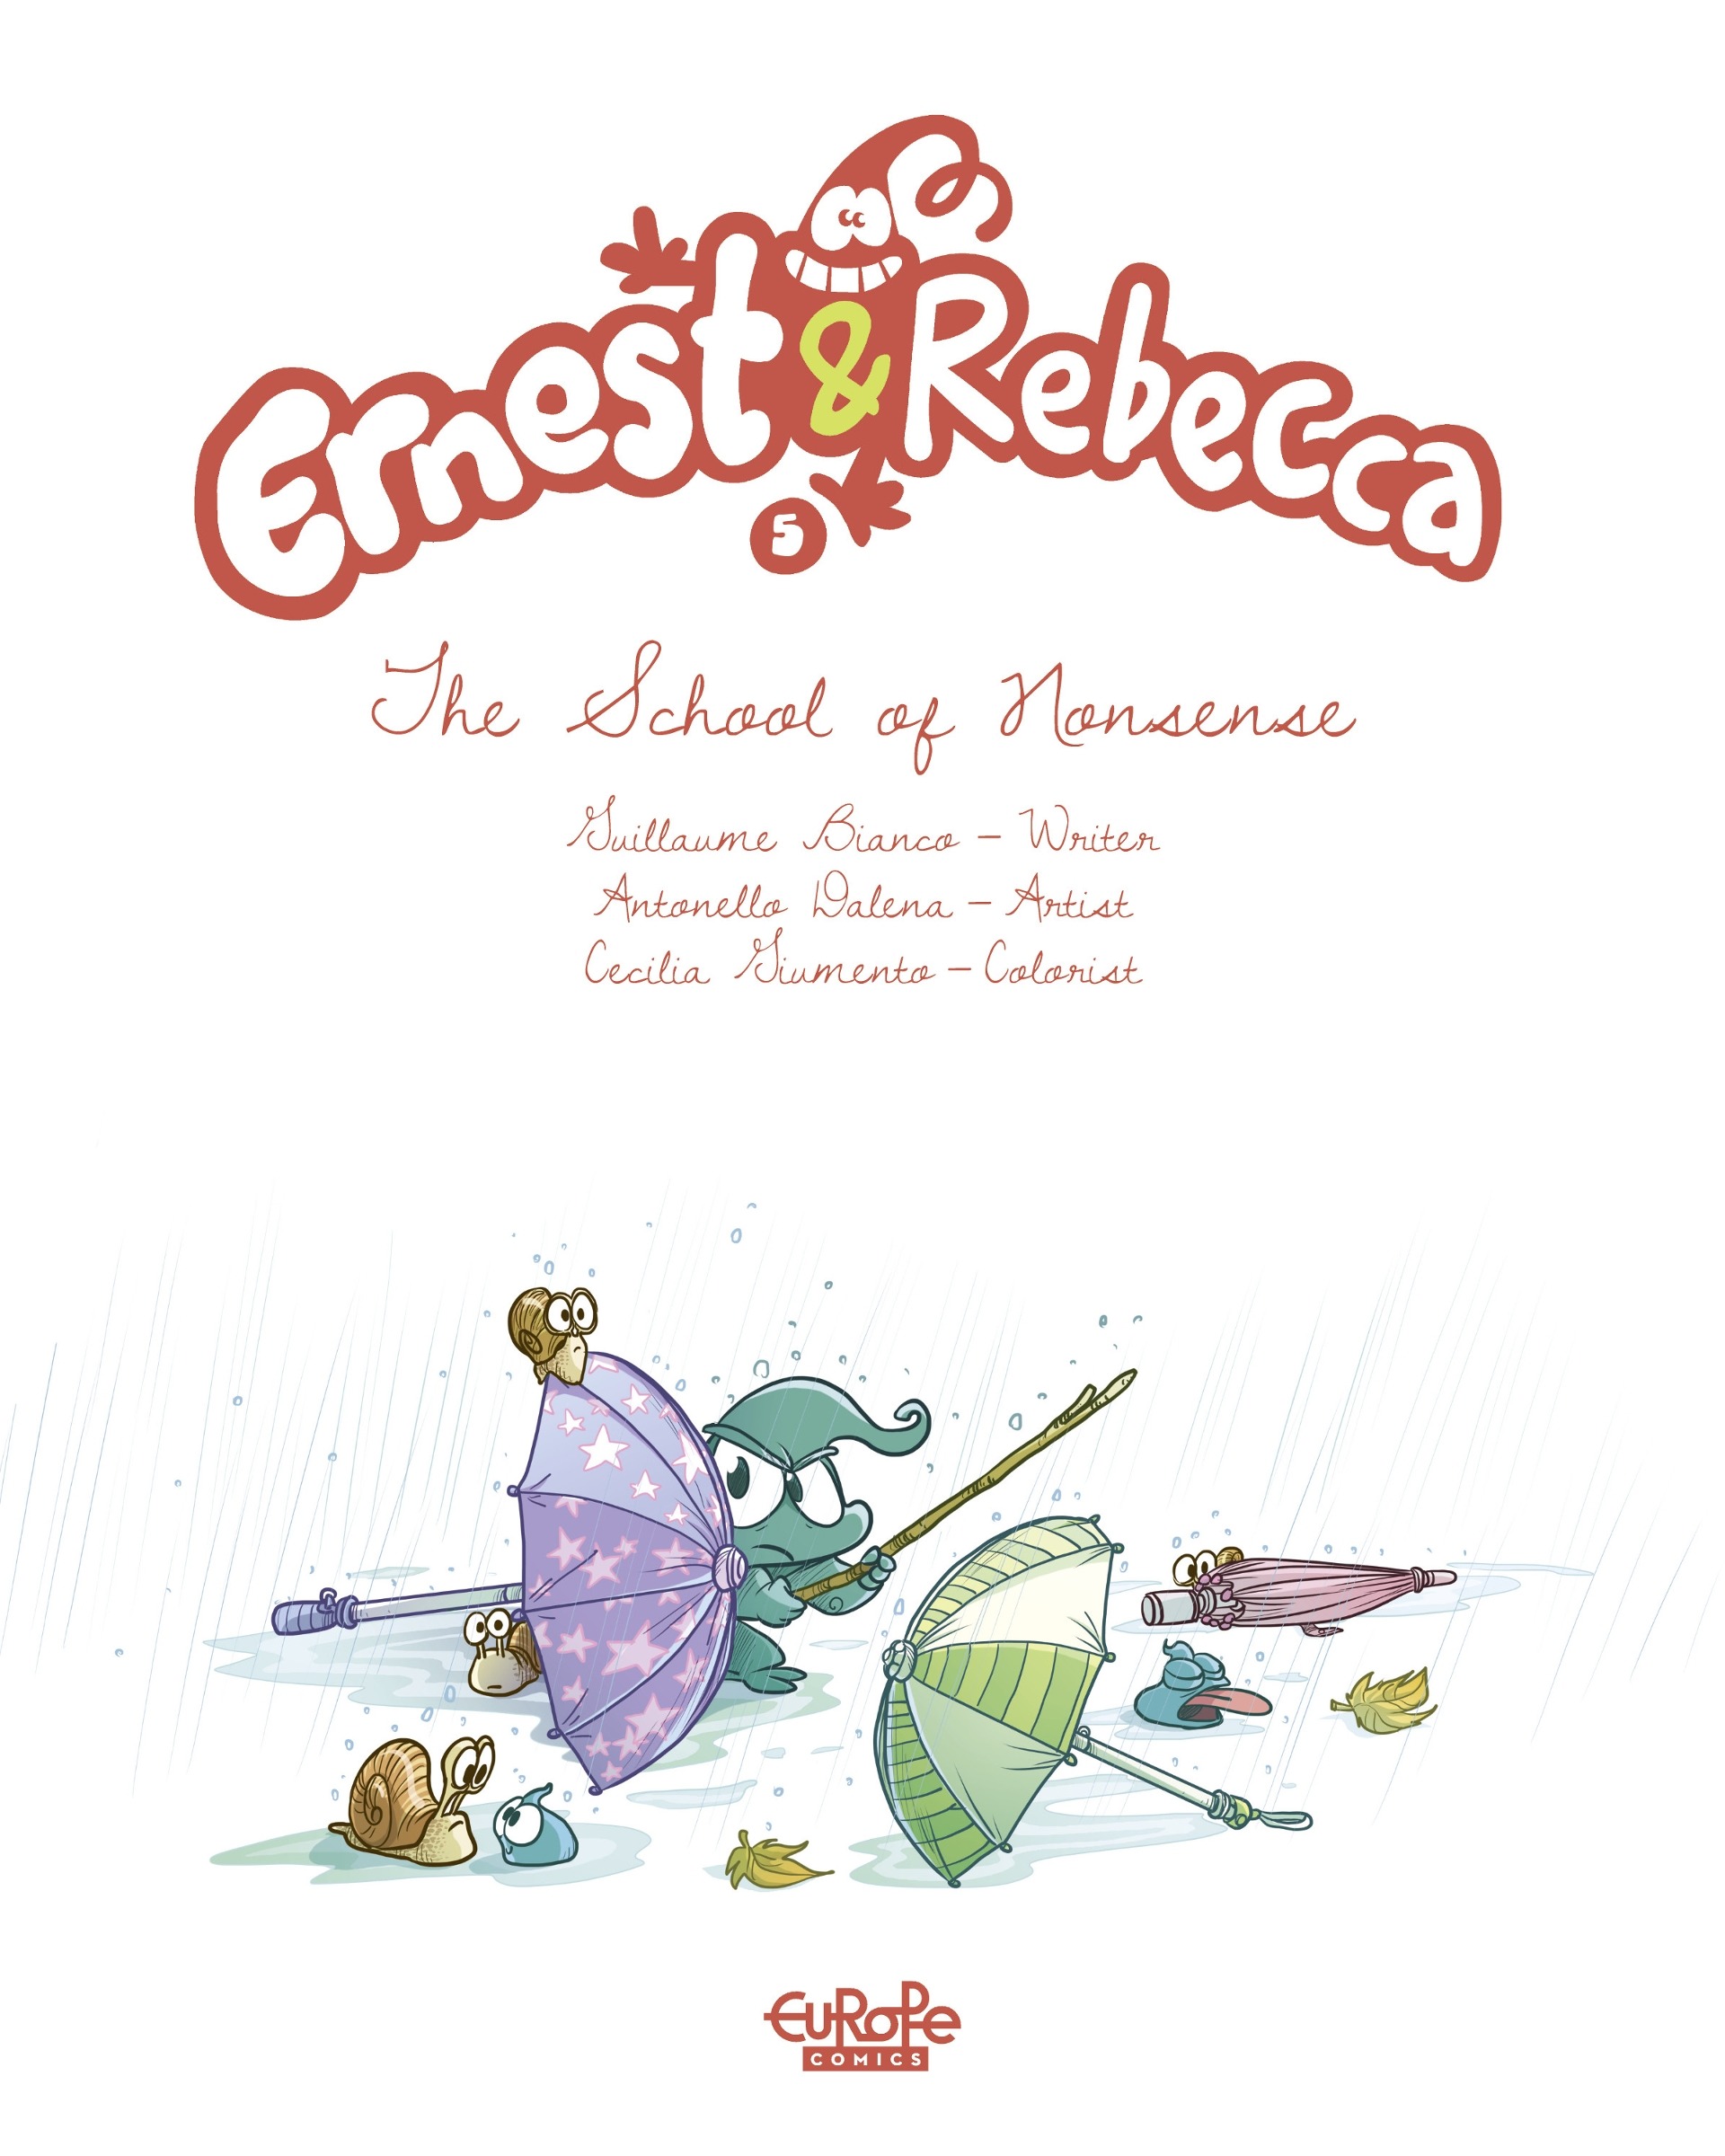 Read online Ernest & Rebecca comic -  Issue #5 - 3